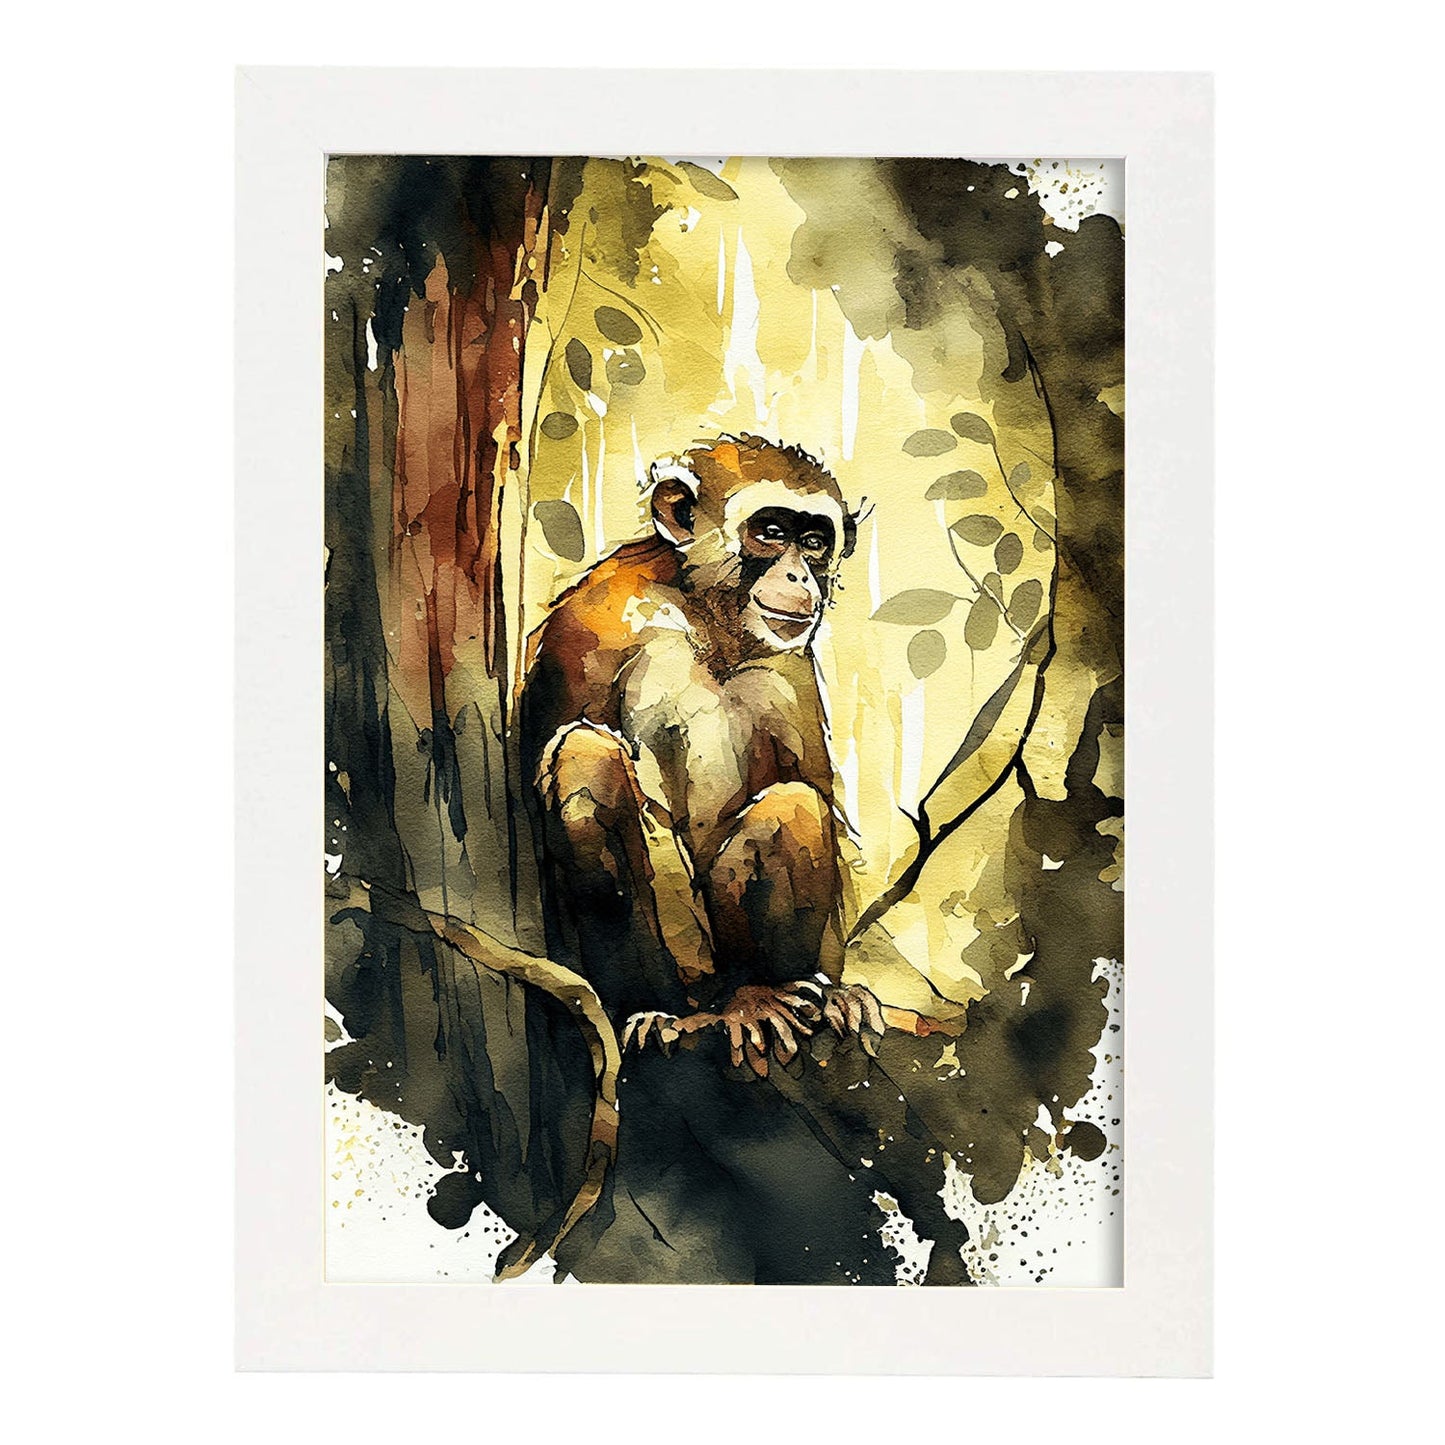 Nacnic Watercolor of Monkey in the forest. Aesthetic Wall Art Prints for Bedroom or Living Room Design.